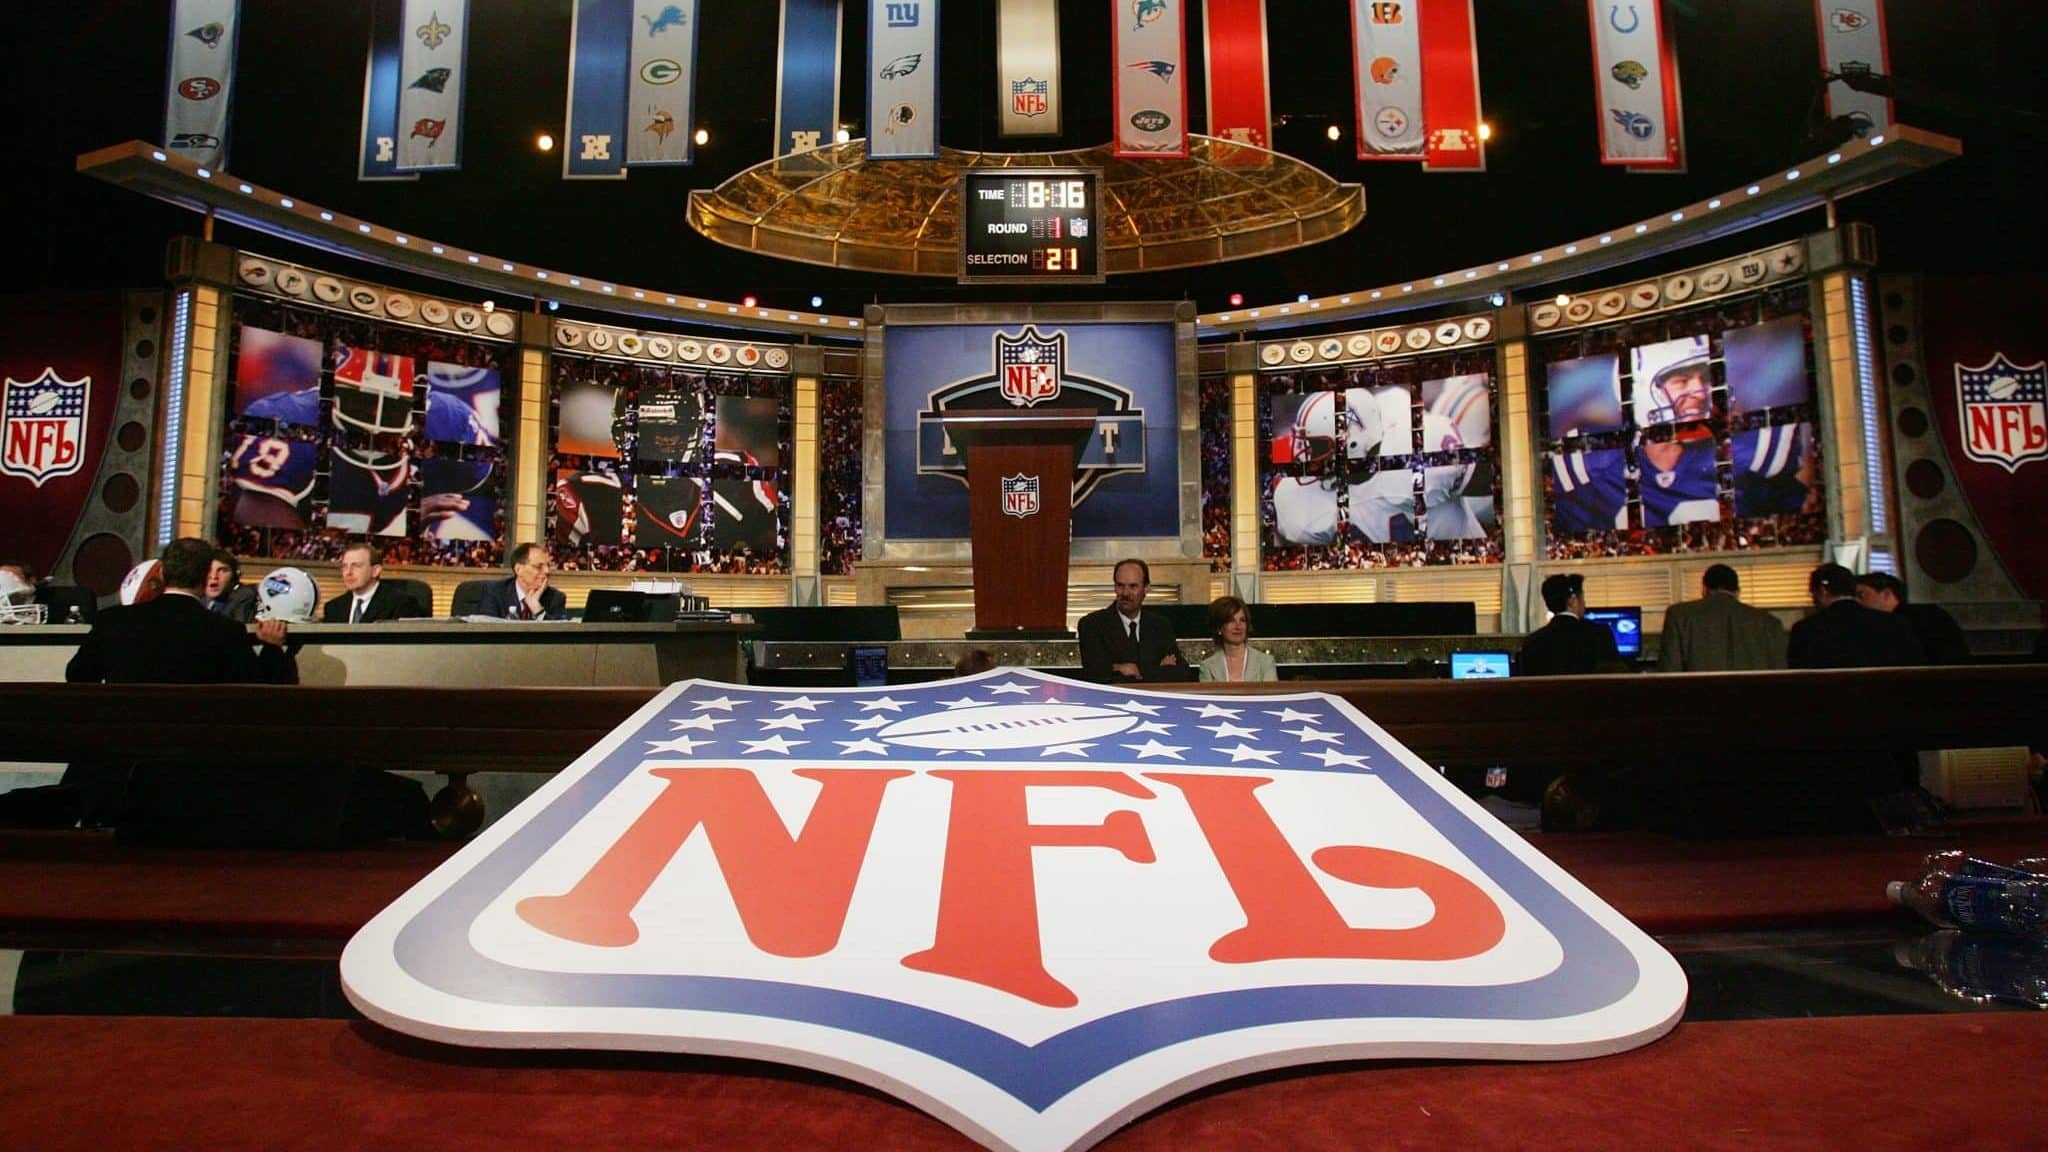 NEW YORK - APRIL 29: The stage is shown with the NFL Logo at the 2006 NFL Draft on April 29, 2006 at Radio City Music Hall in New York, New York.